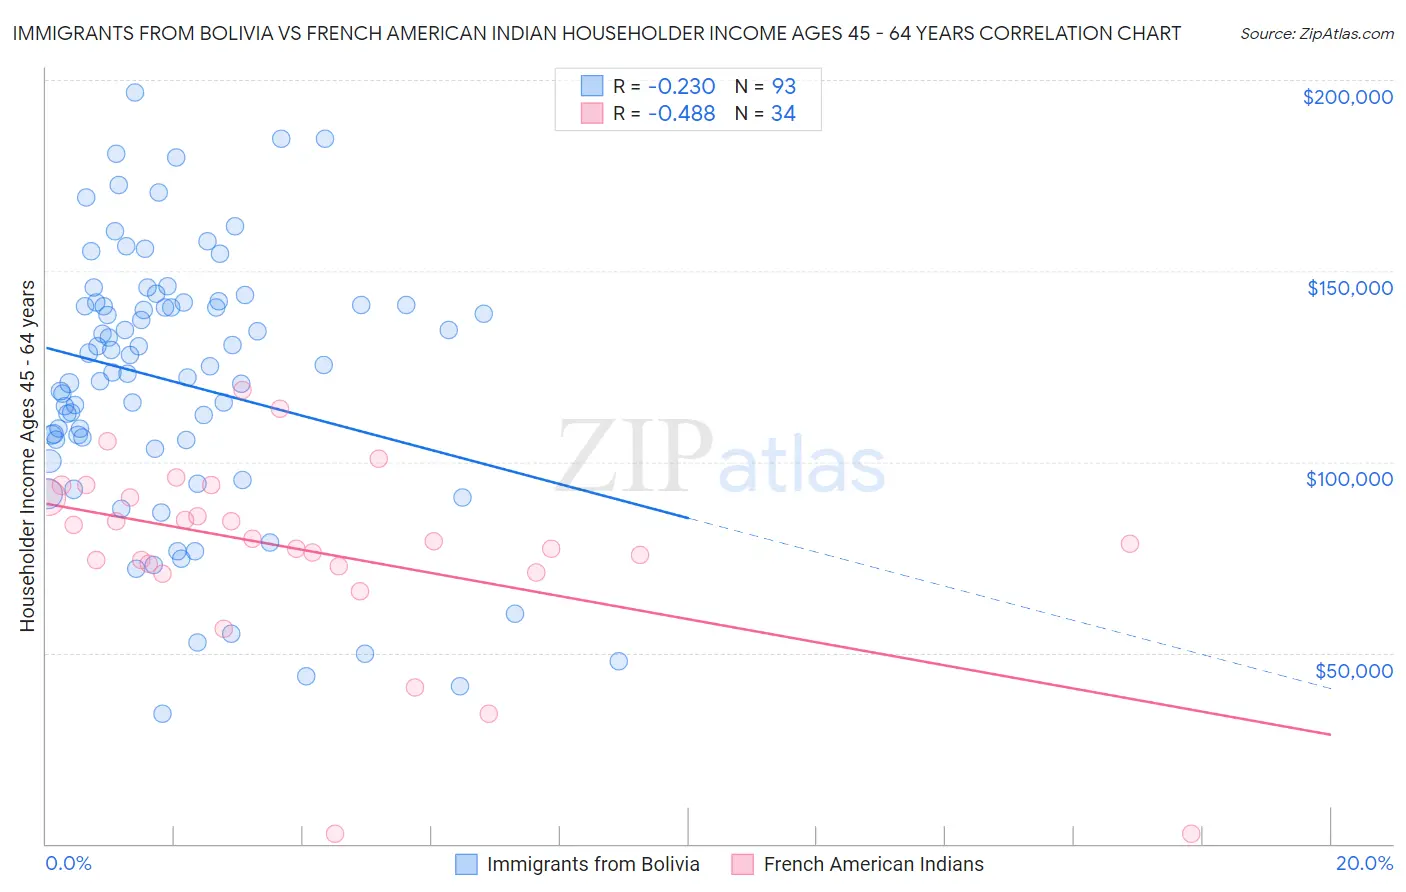 Immigrants from Bolivia vs French American Indian Householder Income Ages 45 - 64 years